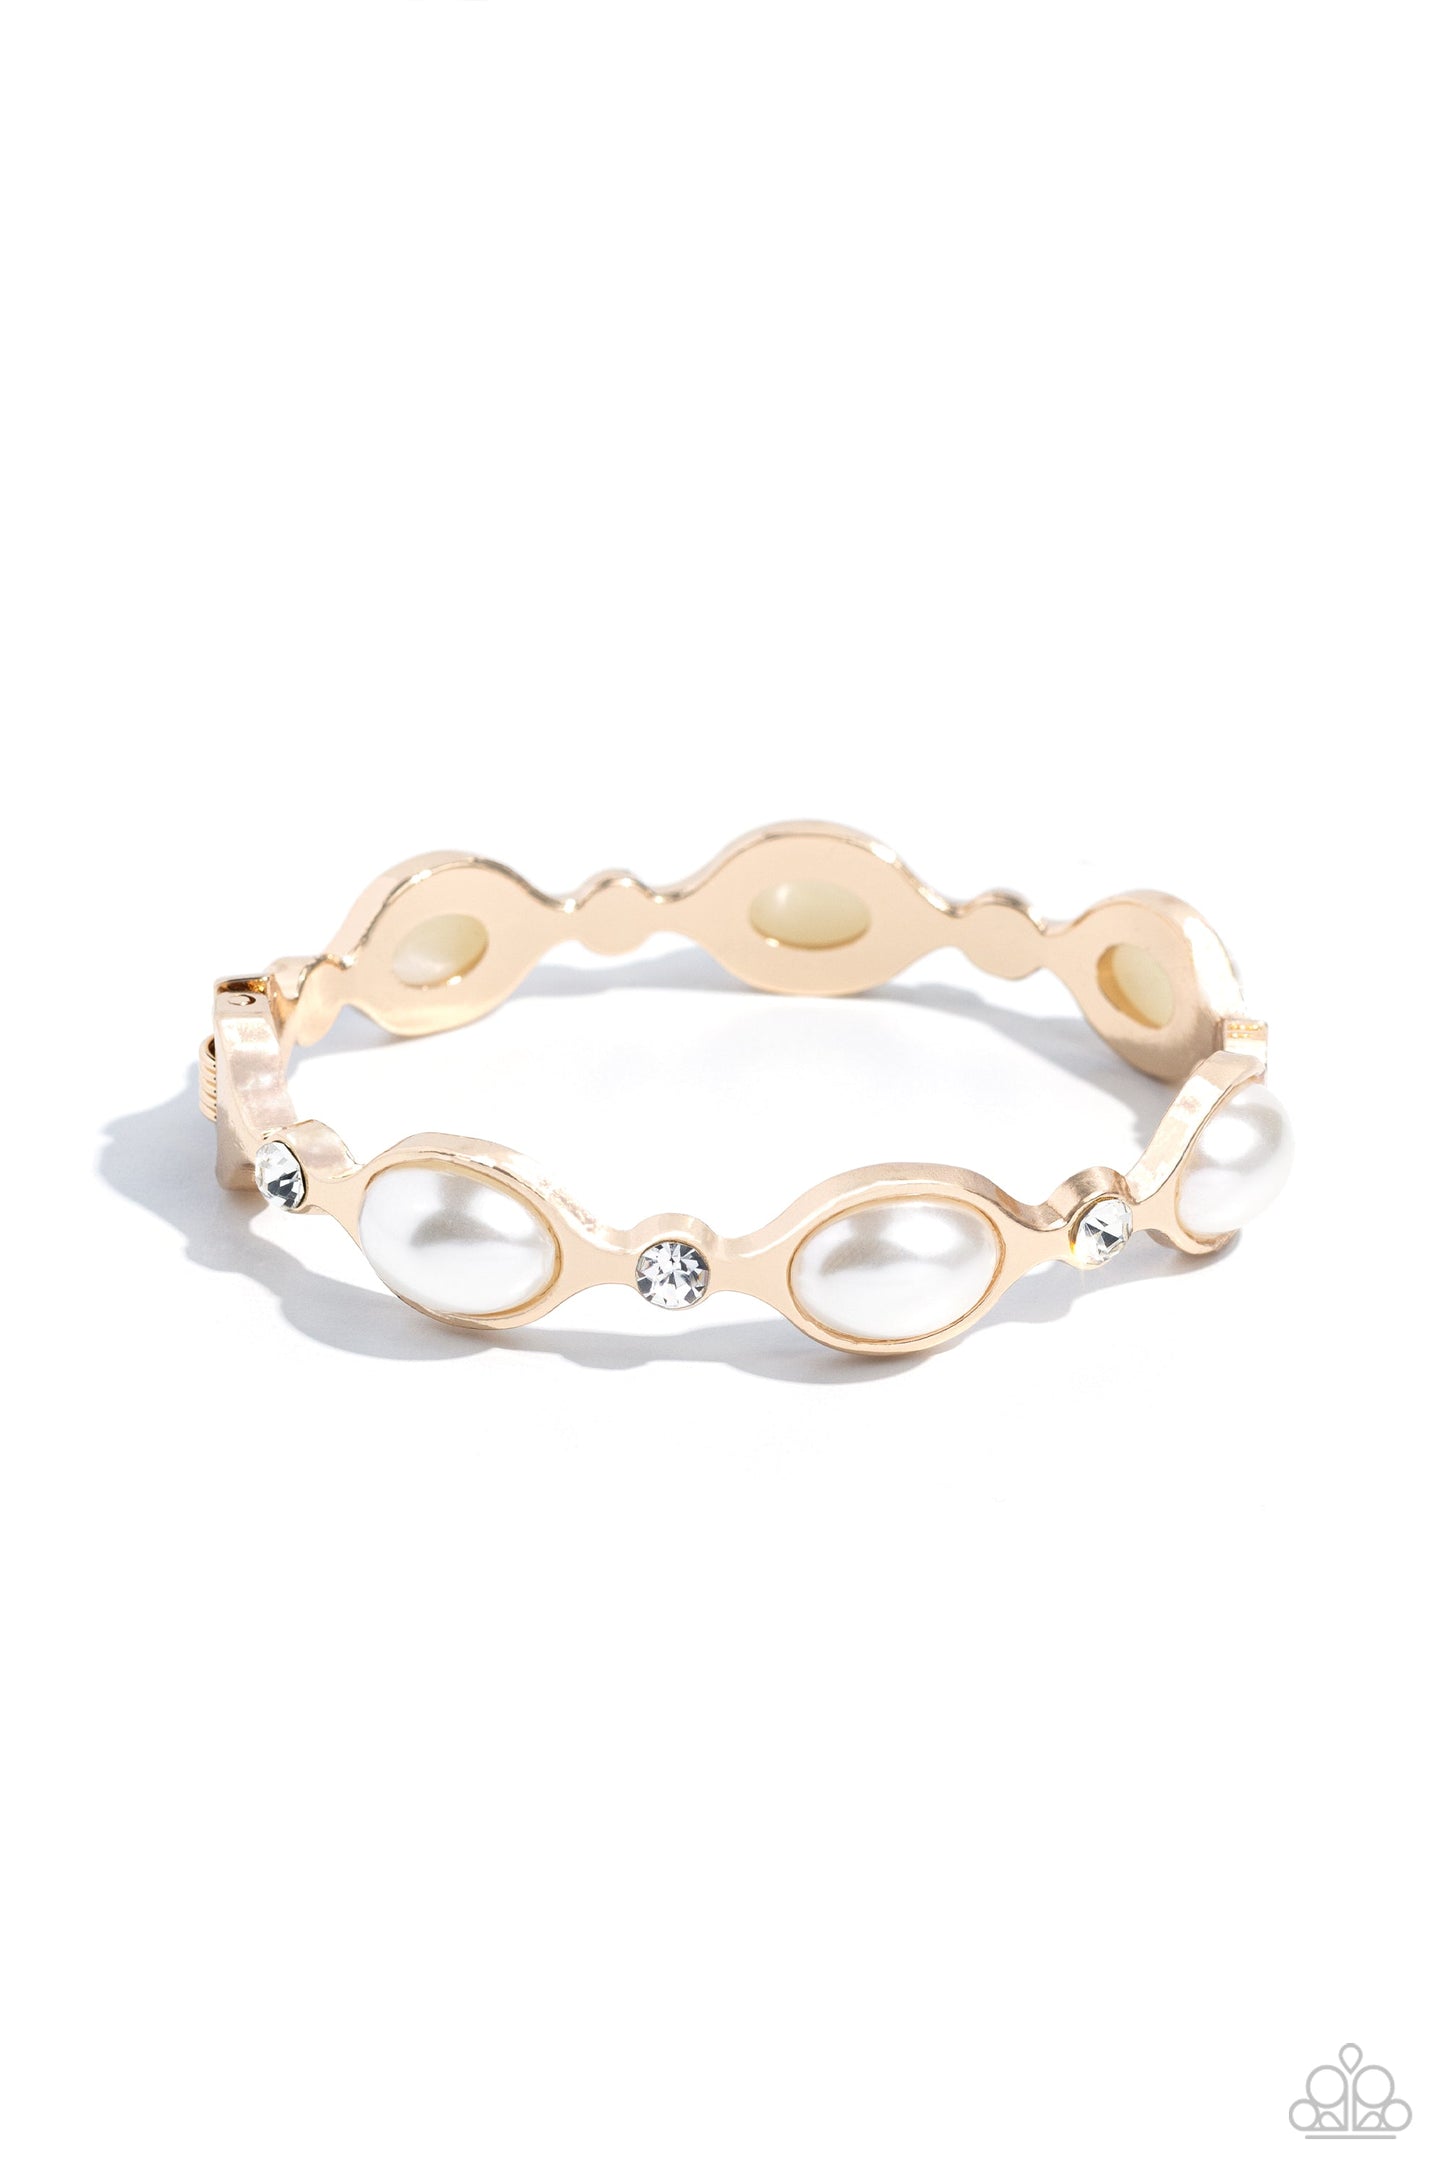 Are You Gonna Be My PEARL? - Gold Scalloped Frame/Oval-Cut Pearls Paparazzi Hinge Bracelet